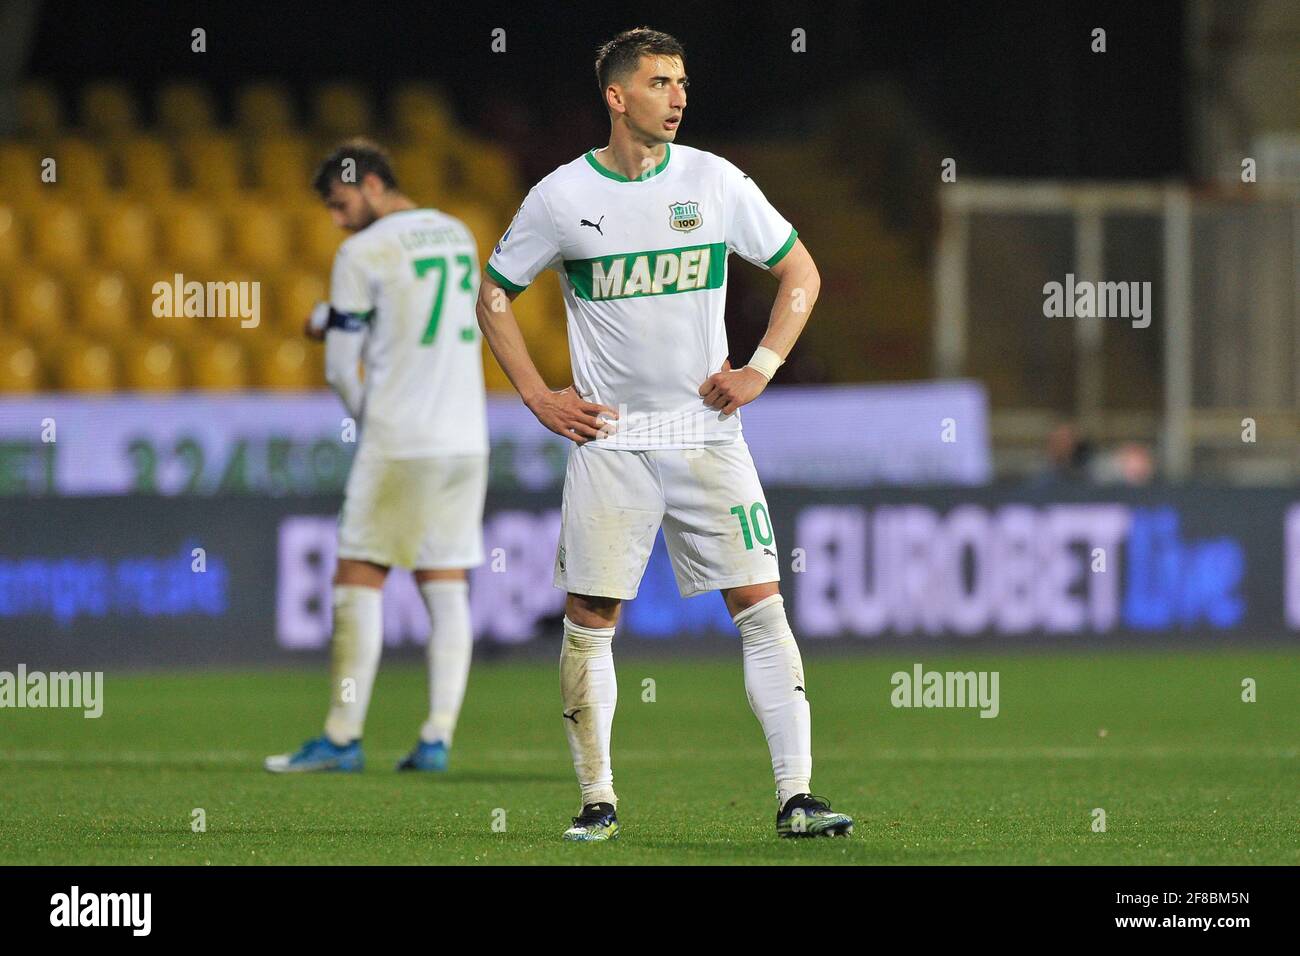 Filip Djuricic player of Sassuolo, during the match of the Italian football league Serie A between Benevento vs Sassuolo final result 0-1, match playe Stock Photo